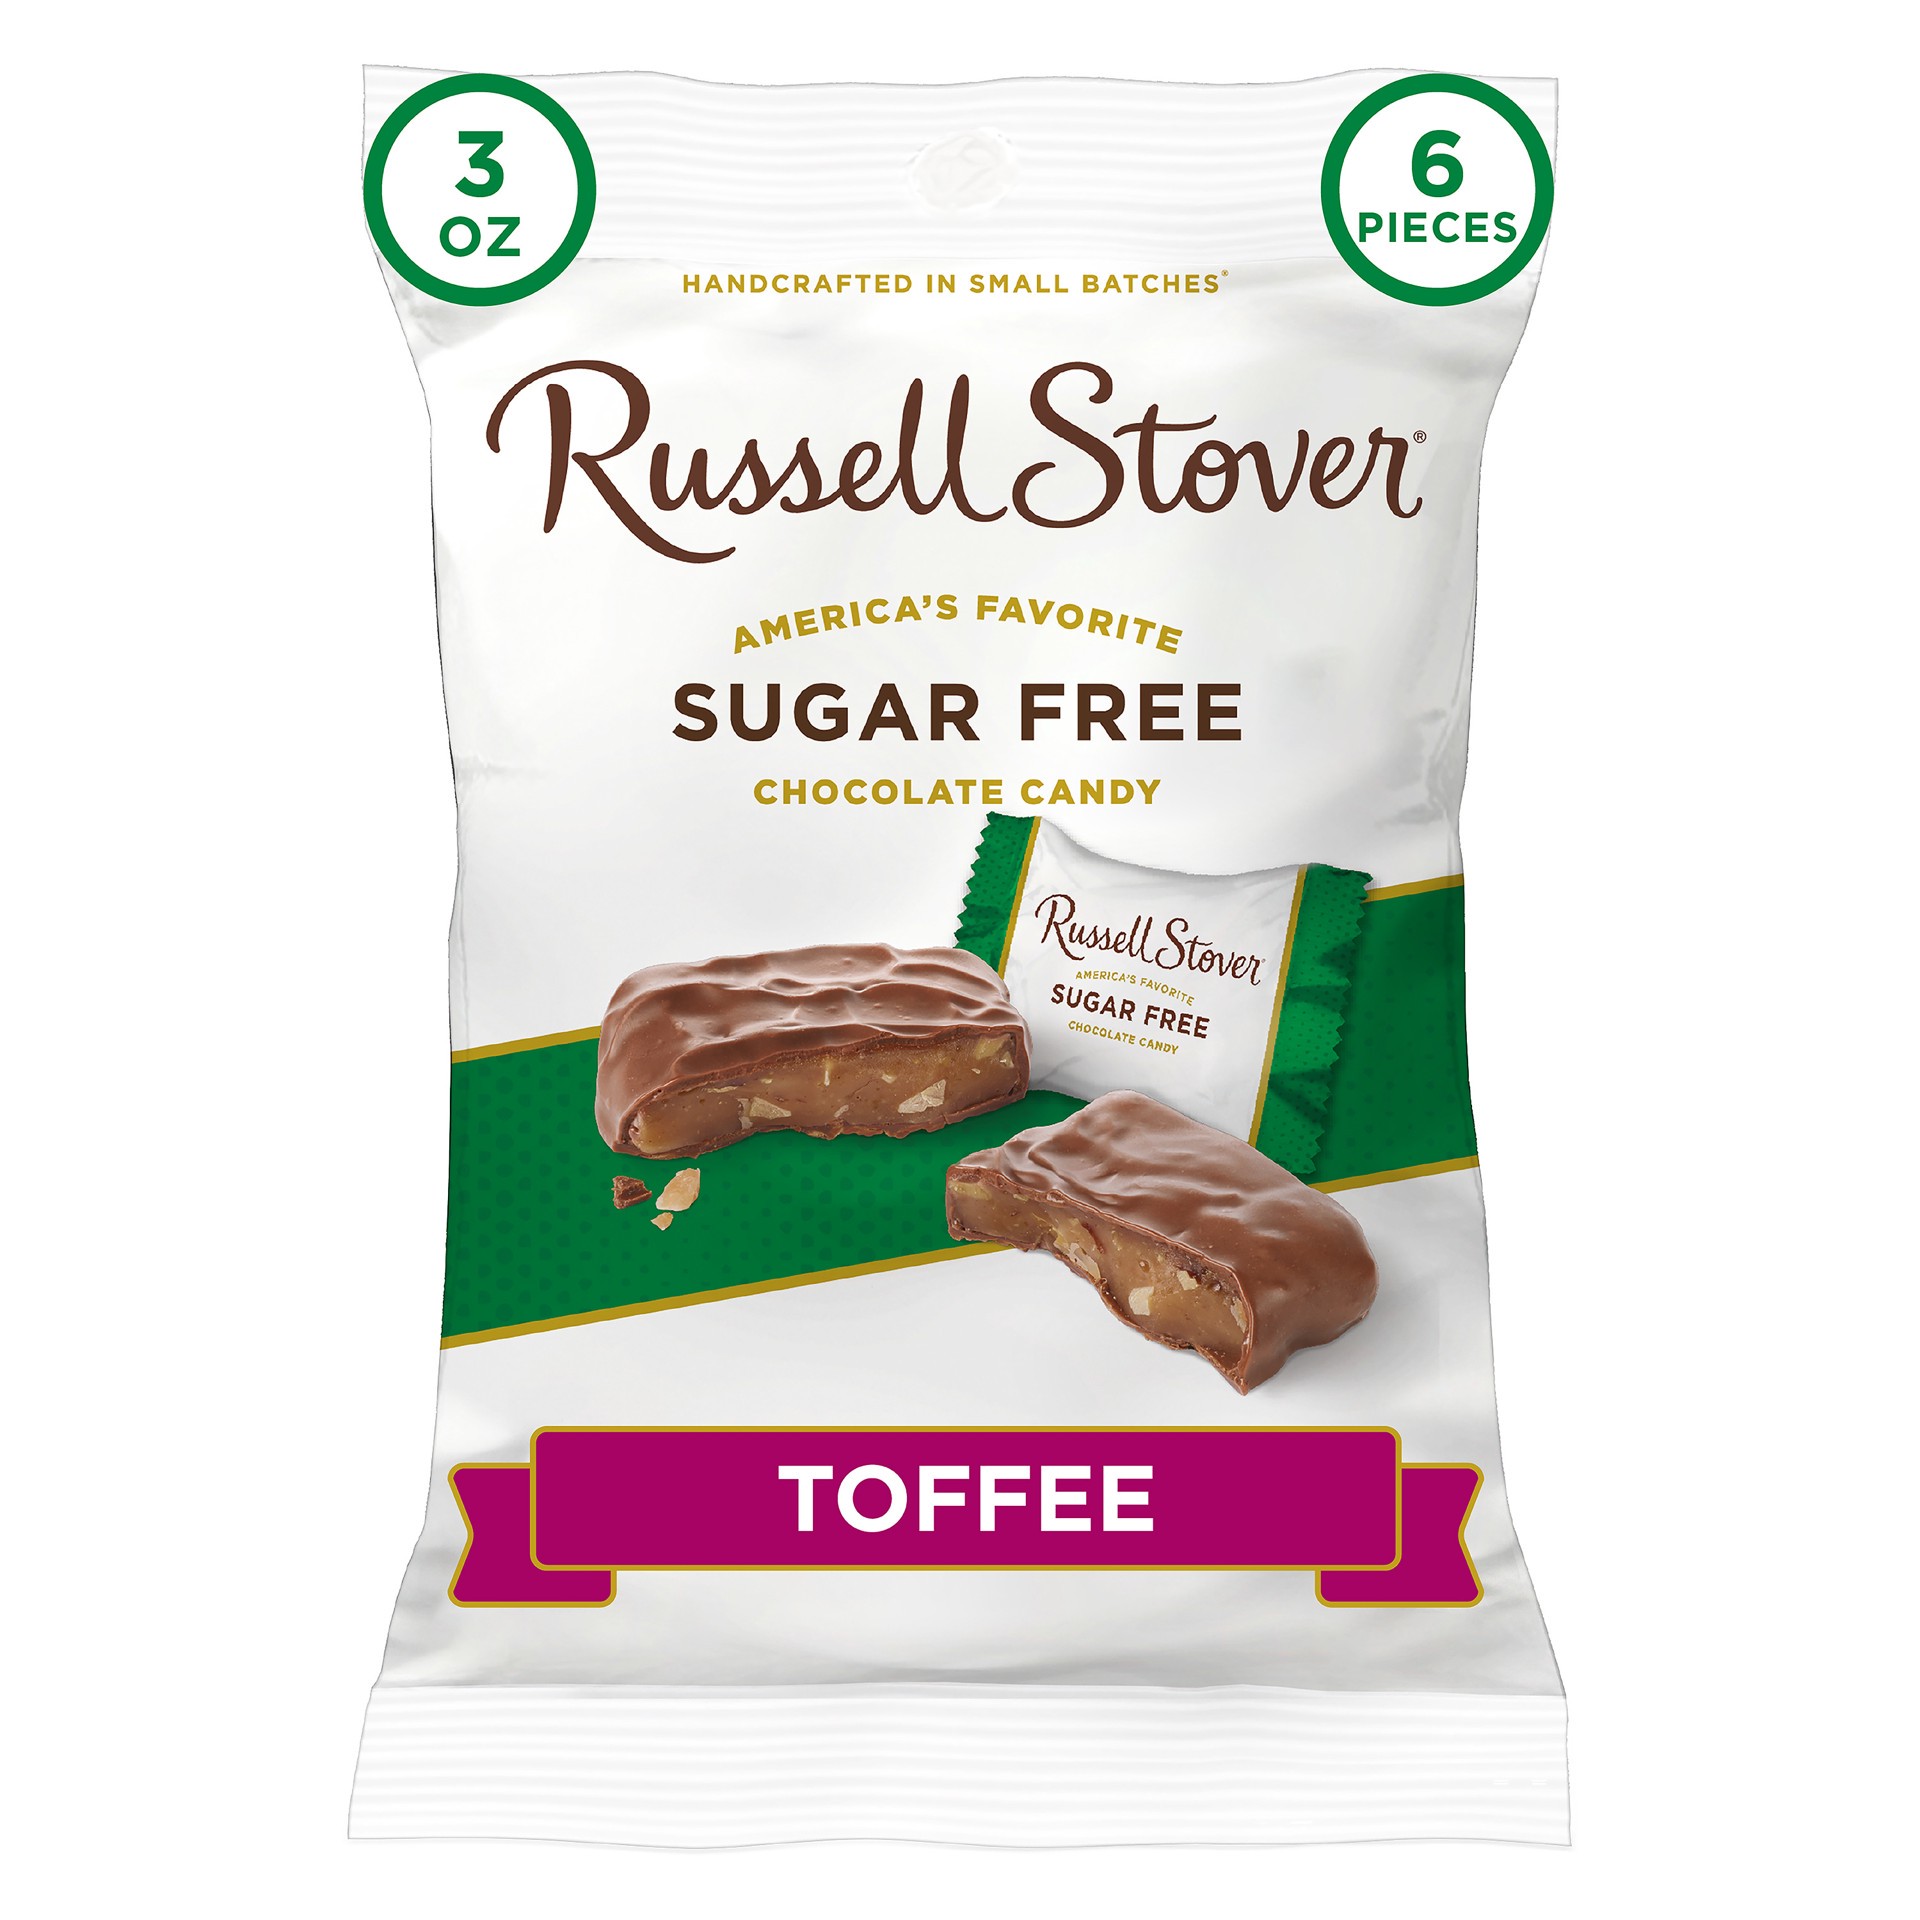 slide 1 of 8, RUSSELL STOVER Sugar Free Toffee Chocolate Candy, 3 oz. bag (˜ 6 pieces), 3 oz